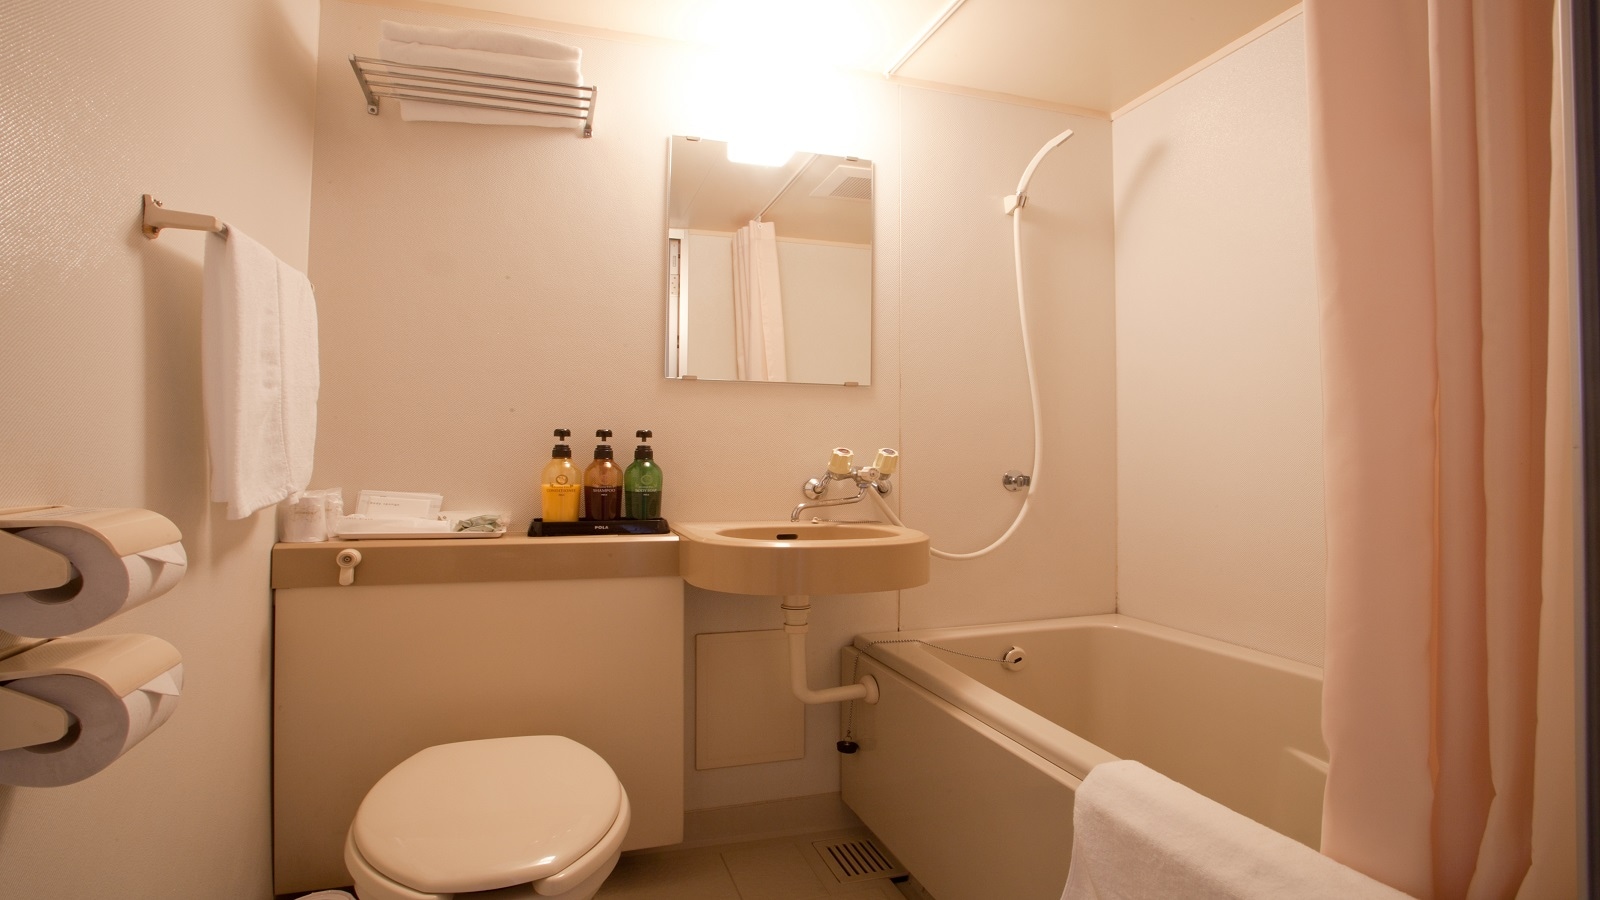 All rooms with unit bath and toilet